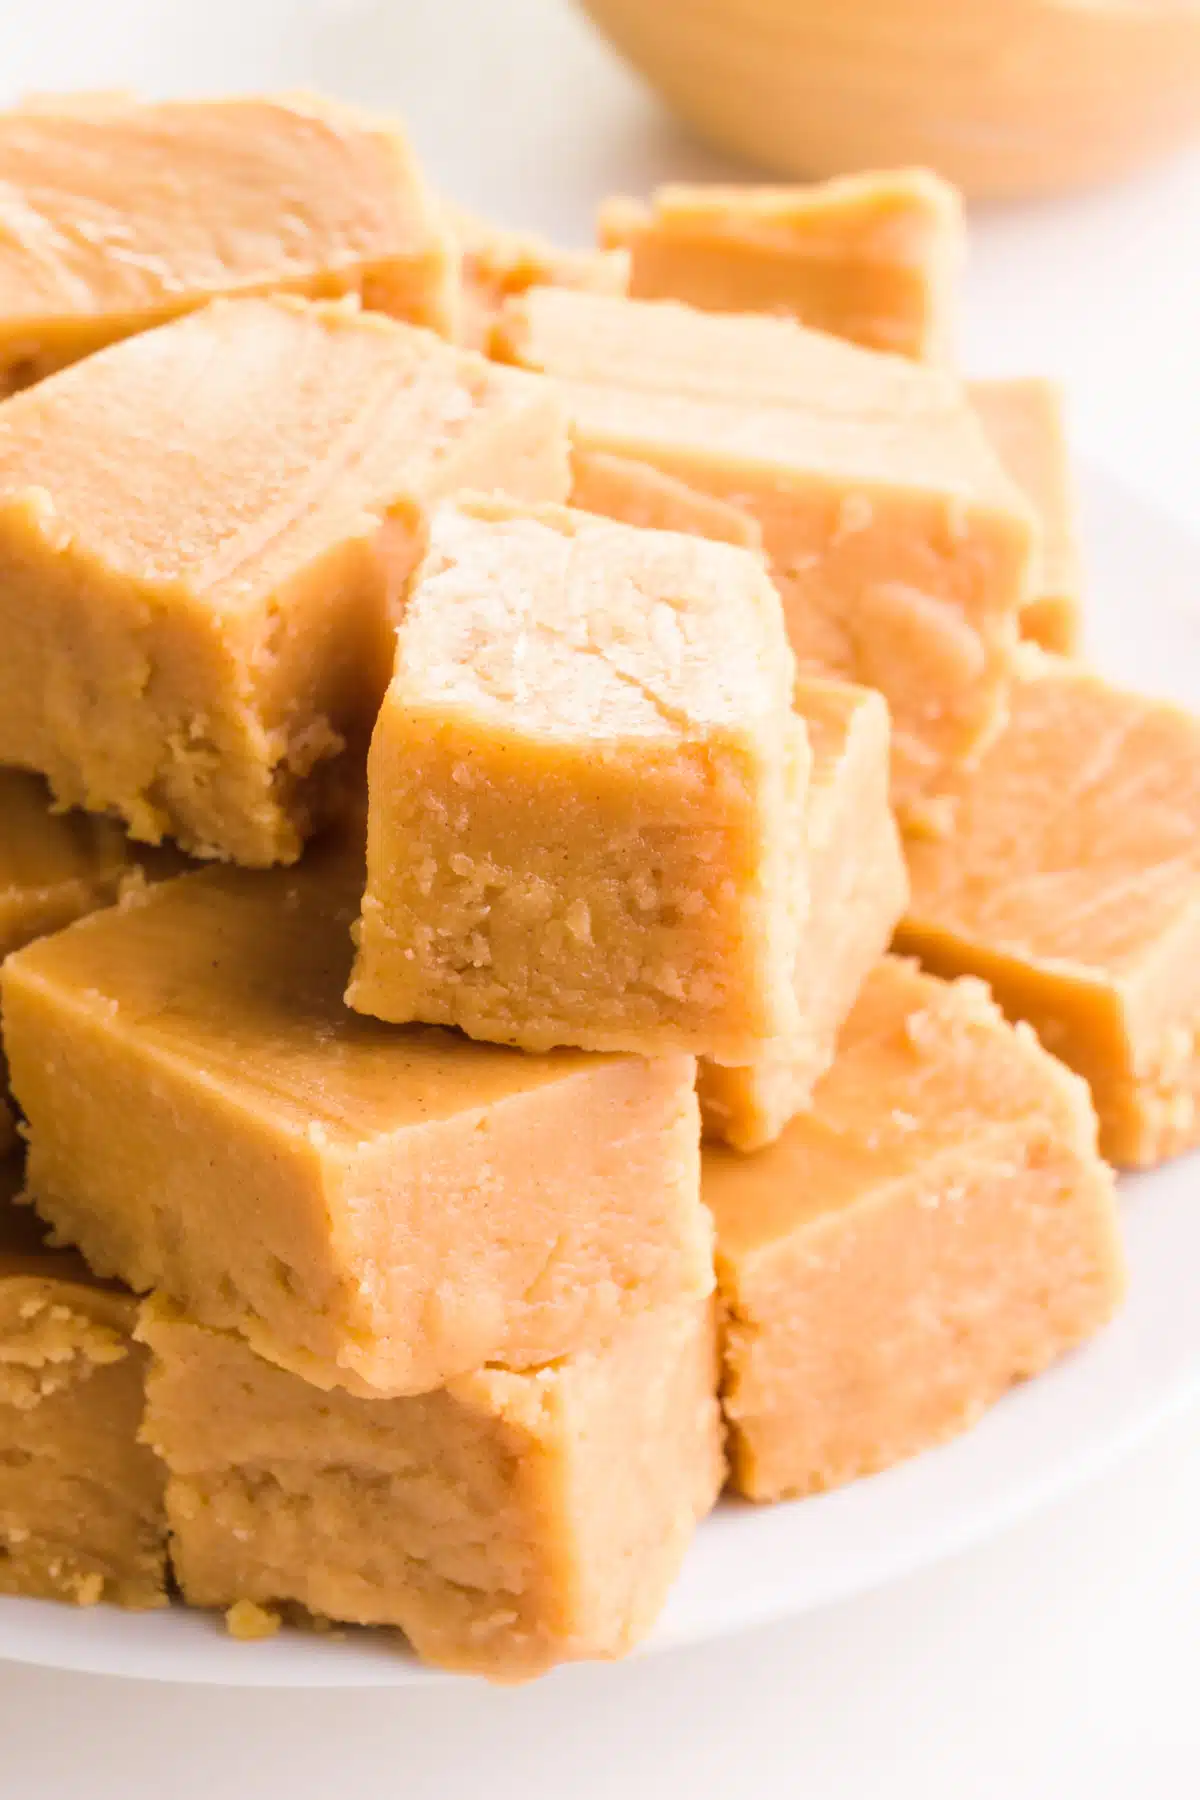 A stack of vegan peanut butter fudge sits on a plate.